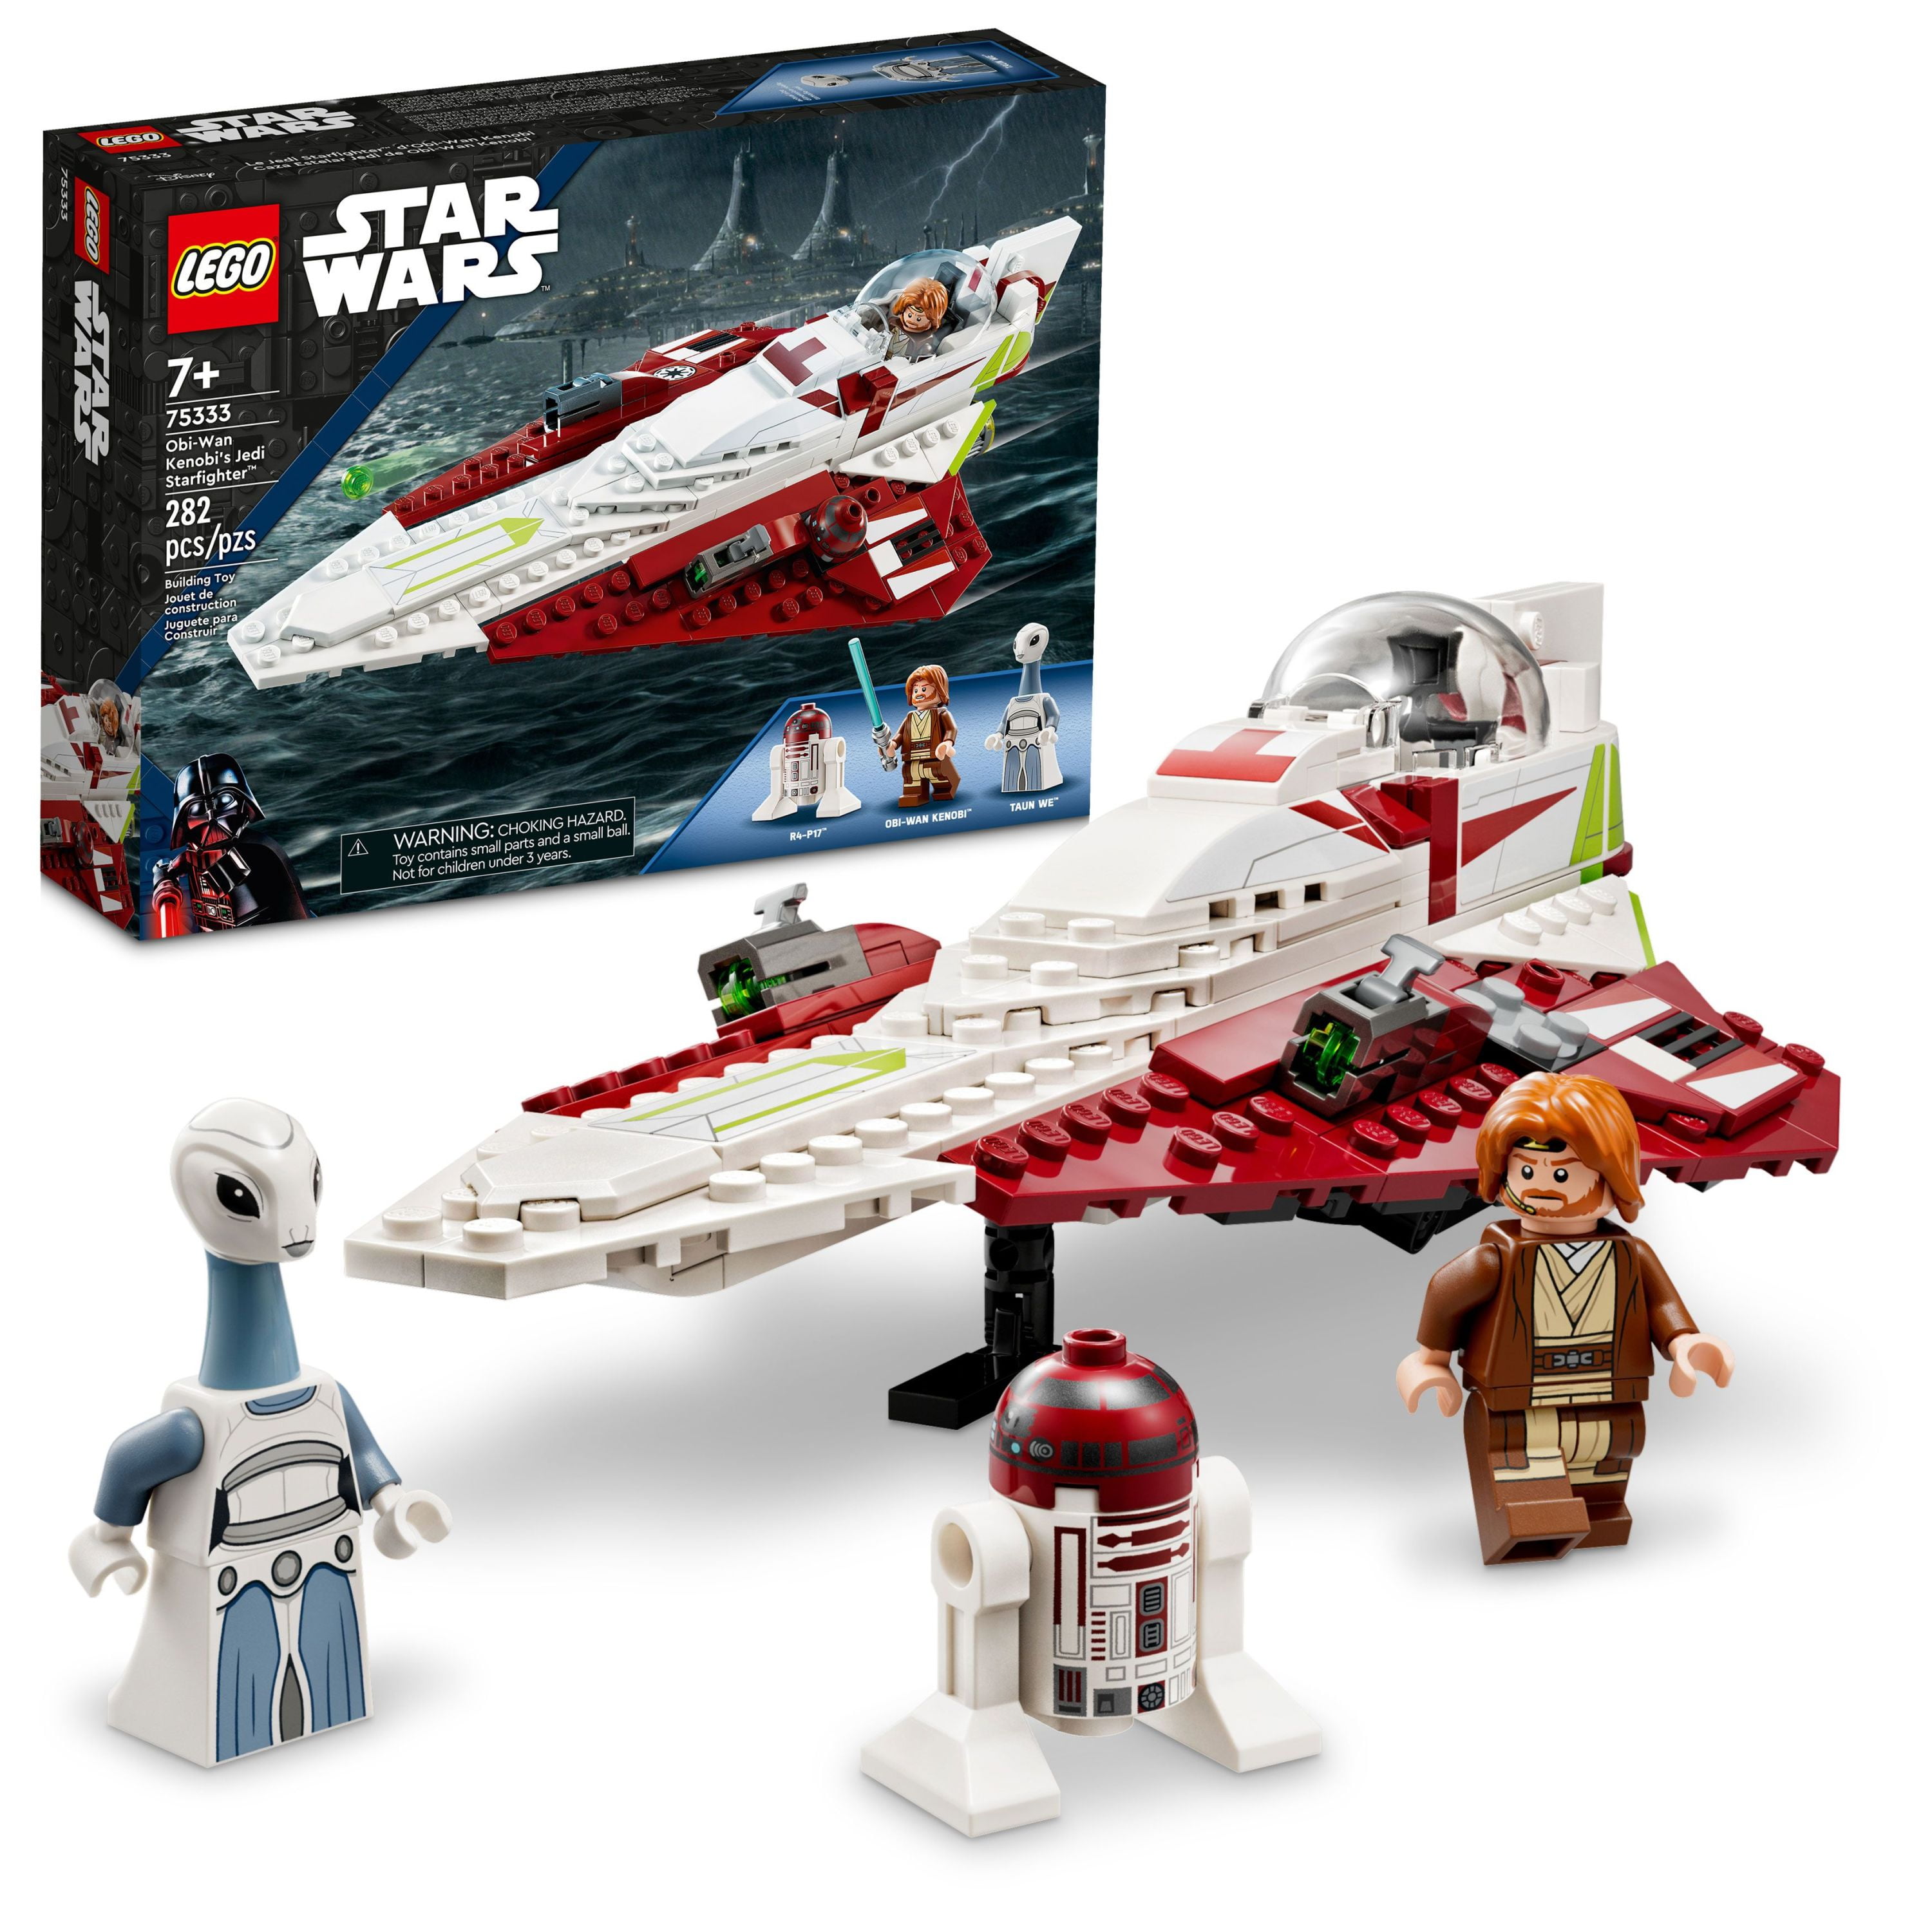 het doel transmissie smal LEGO Star Wars Obi-Wan Kenobi's Jedi Starfighter 75333, Buildable Toy with  Taun We Minifigure, Droid Figure and Lightsaber, Attack of the Clones Set -  Walmart.com